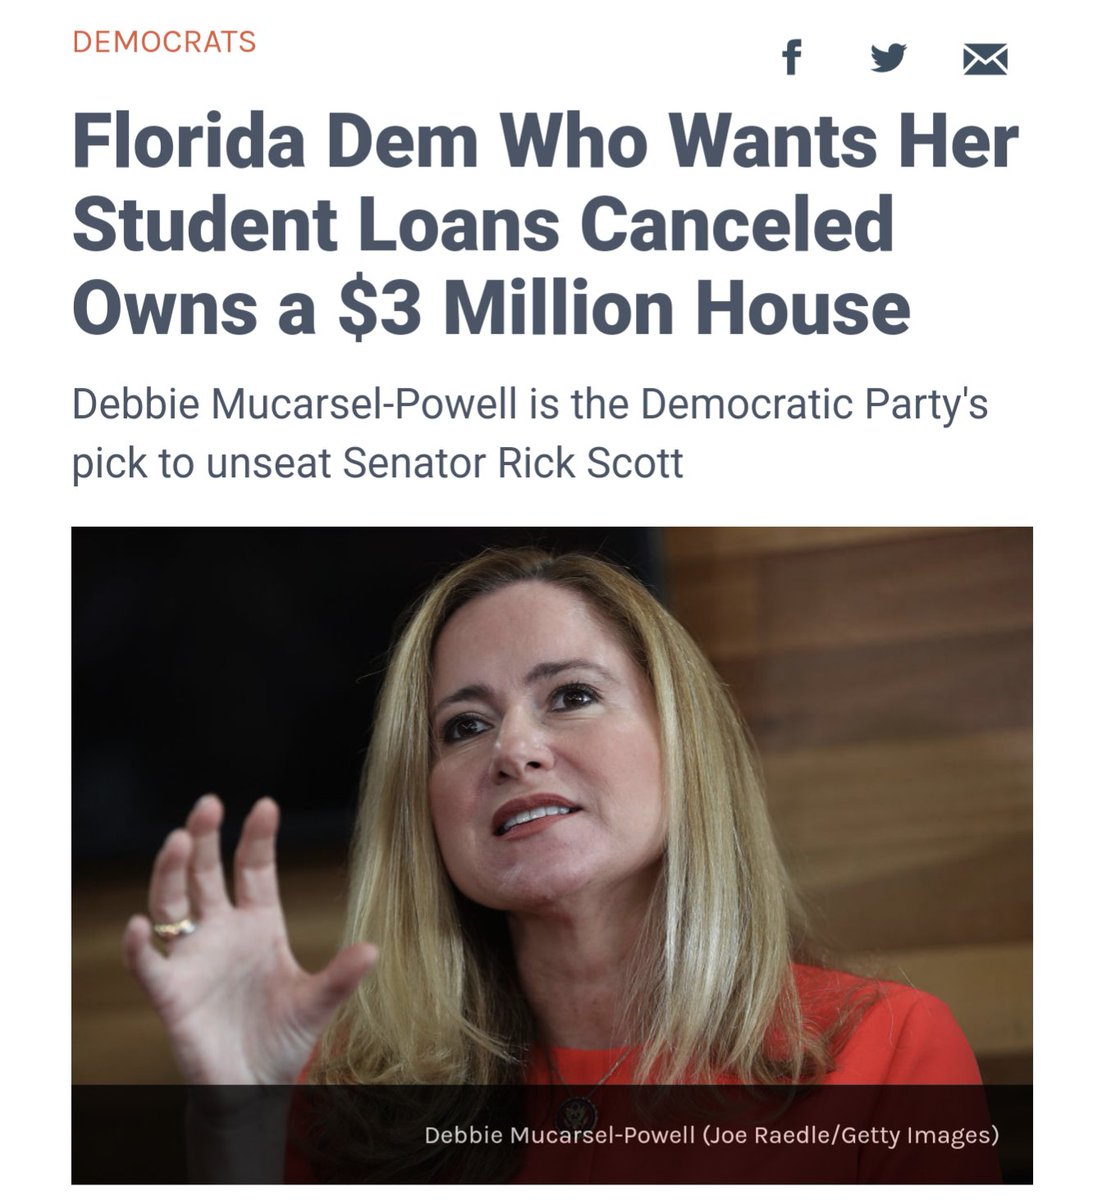 @DebbieforFL Lol you can't make this shit up